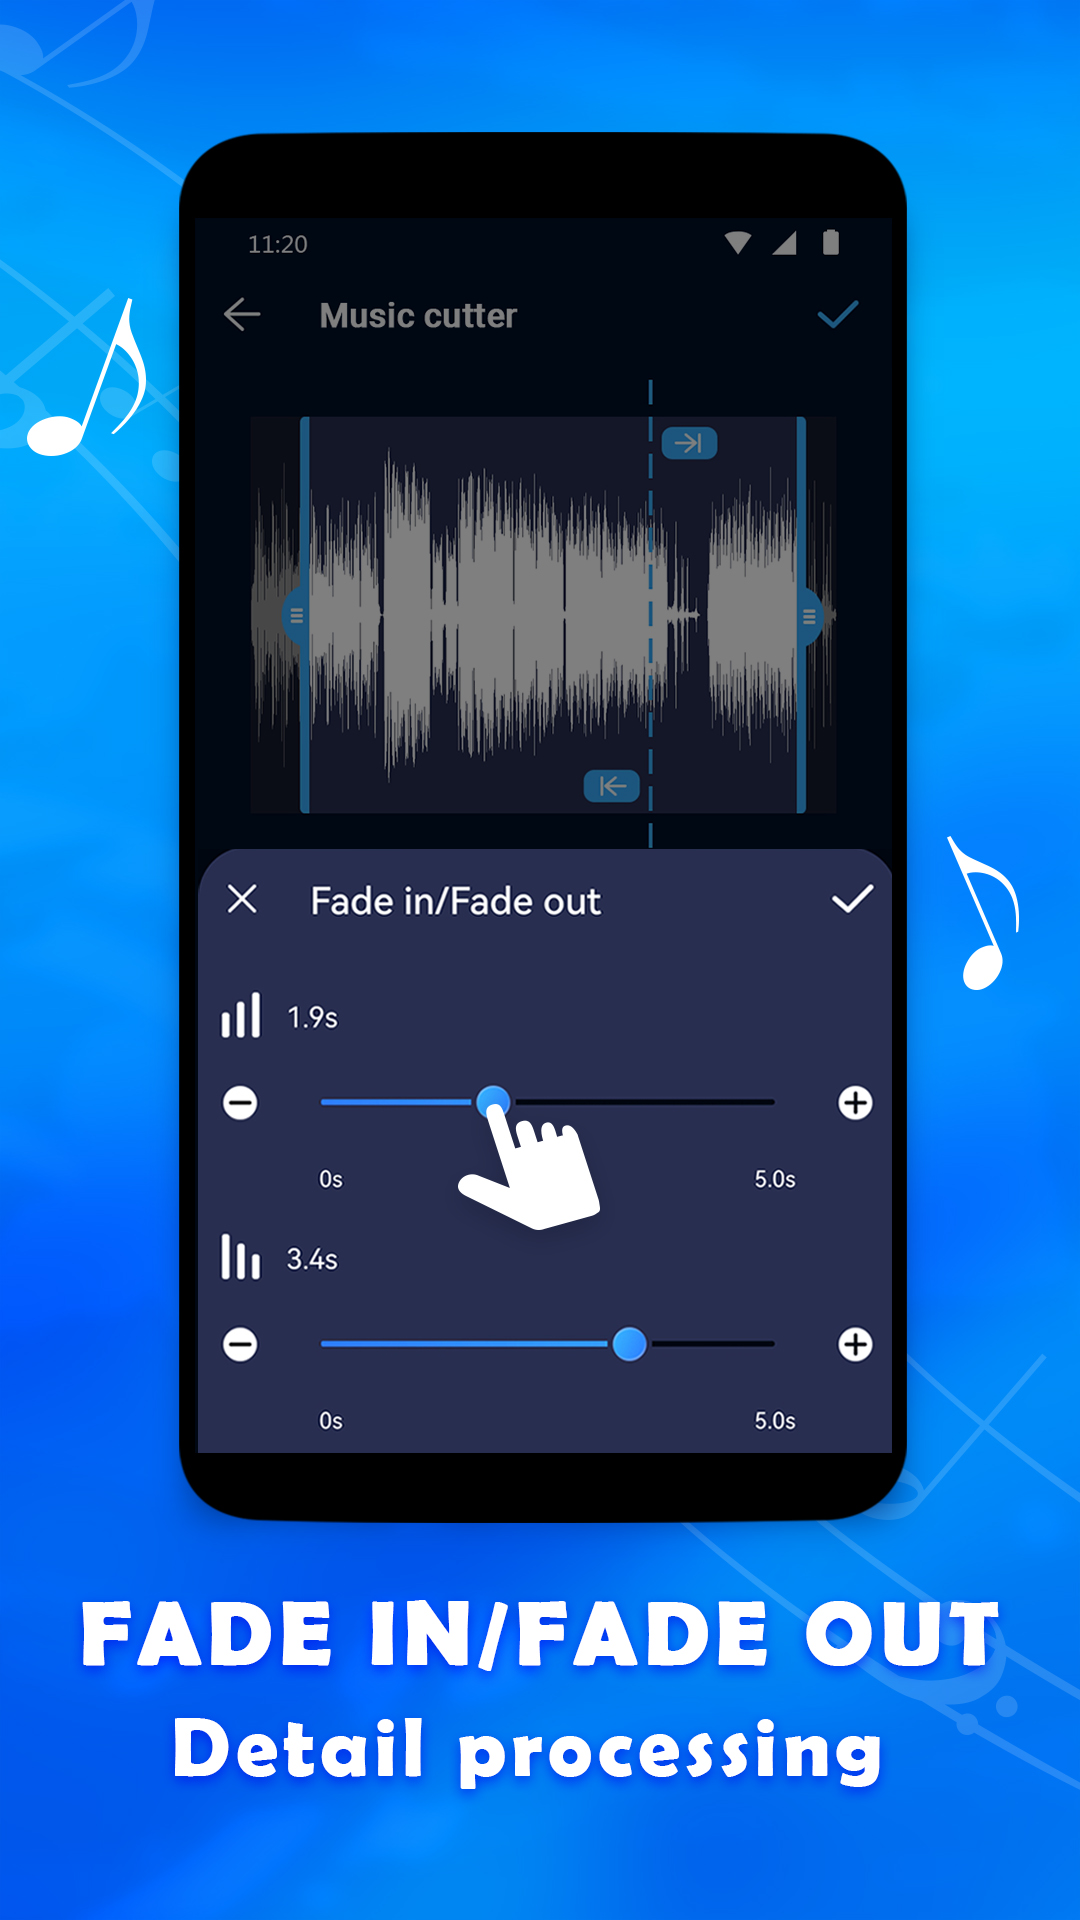 MP3 Cutter & Ringtone Maker APK 3.0.8 for Android – Download MP3 Cutter & Ringtone  Maker XAPK (APK Bundle) Latest Version from APKFab.com